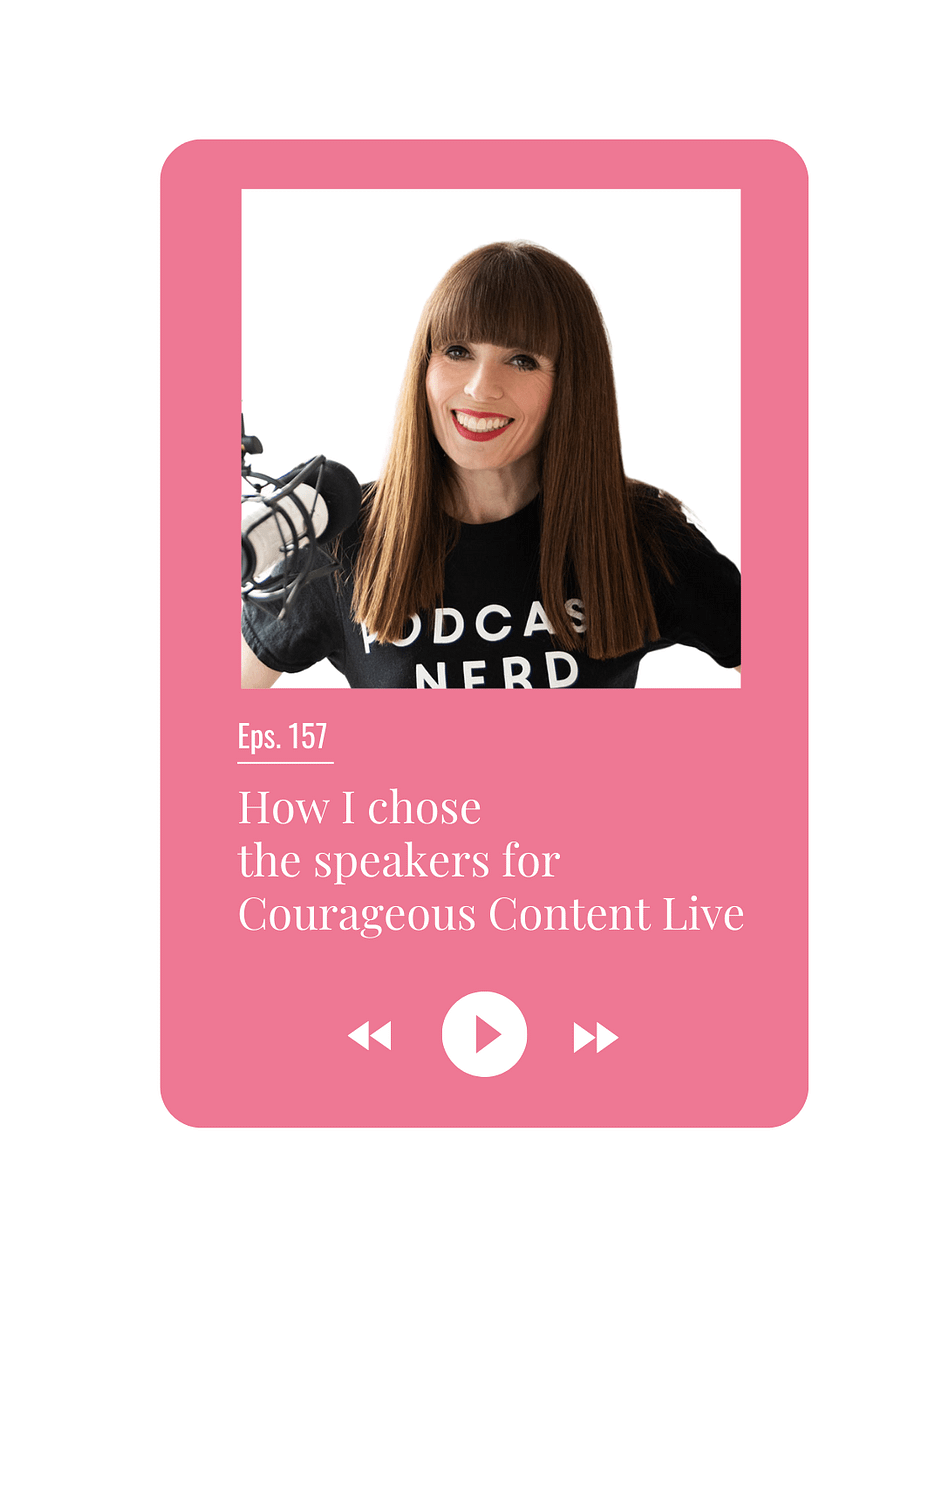 How I chose the speakers for Courageous Content Live